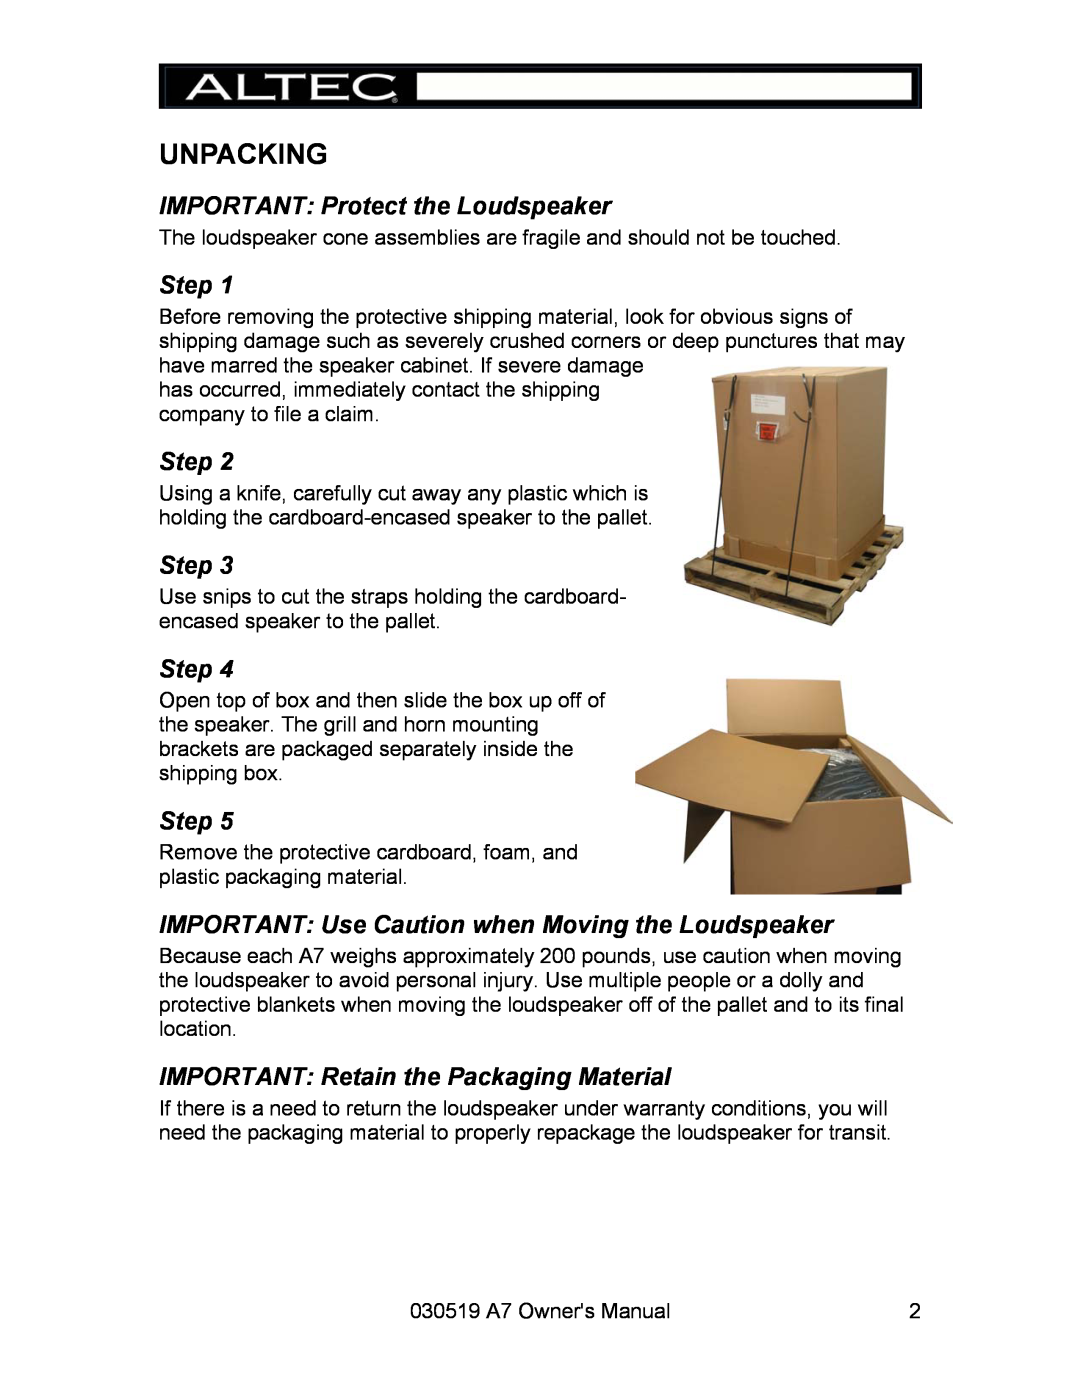 Altec Lansing A7 owner manual Unpacking, IMPORTANT Protect the Loudspeaker, Step, IMPORTANT Retain the Packaging Material 